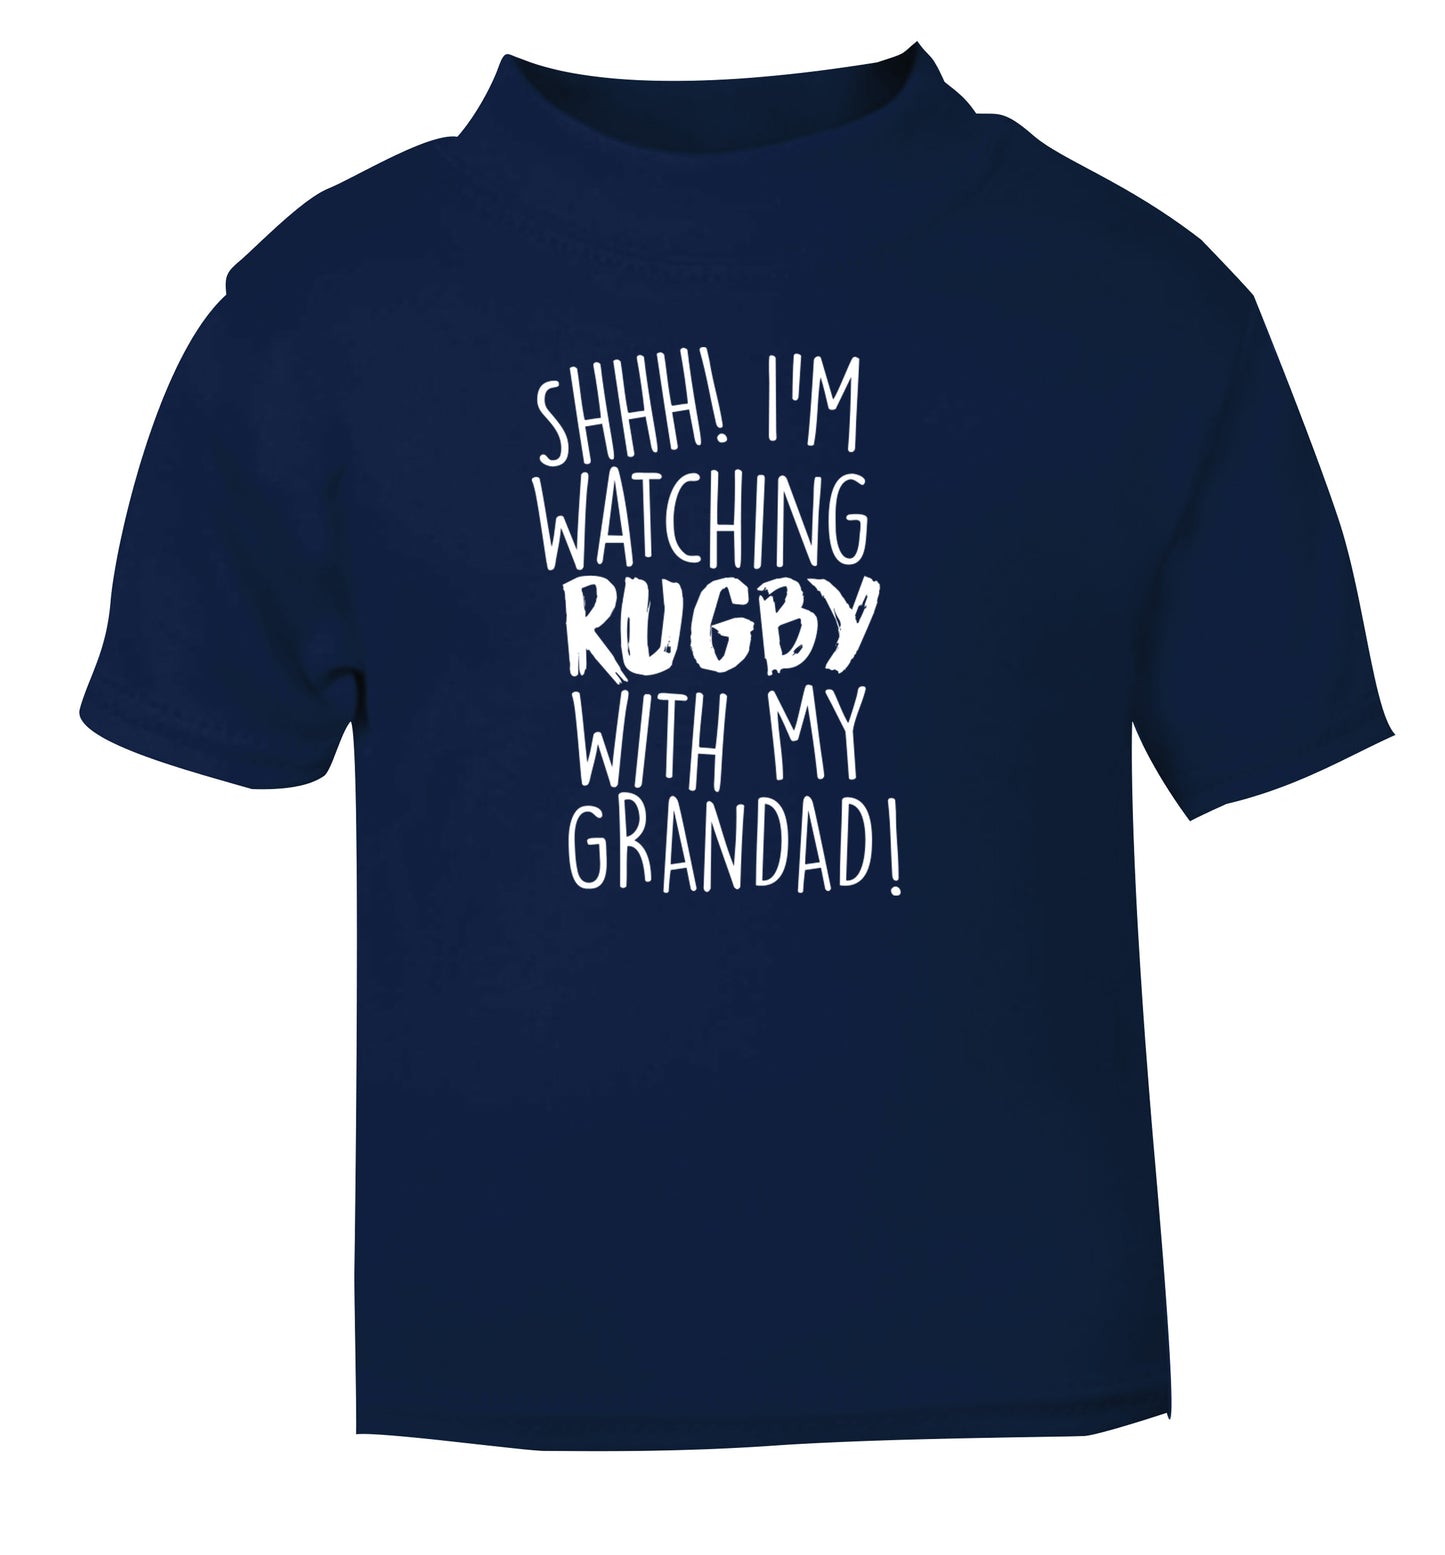 Shh I'm watching rugby with my grandad navy Baby Toddler Tshirt 2 Years